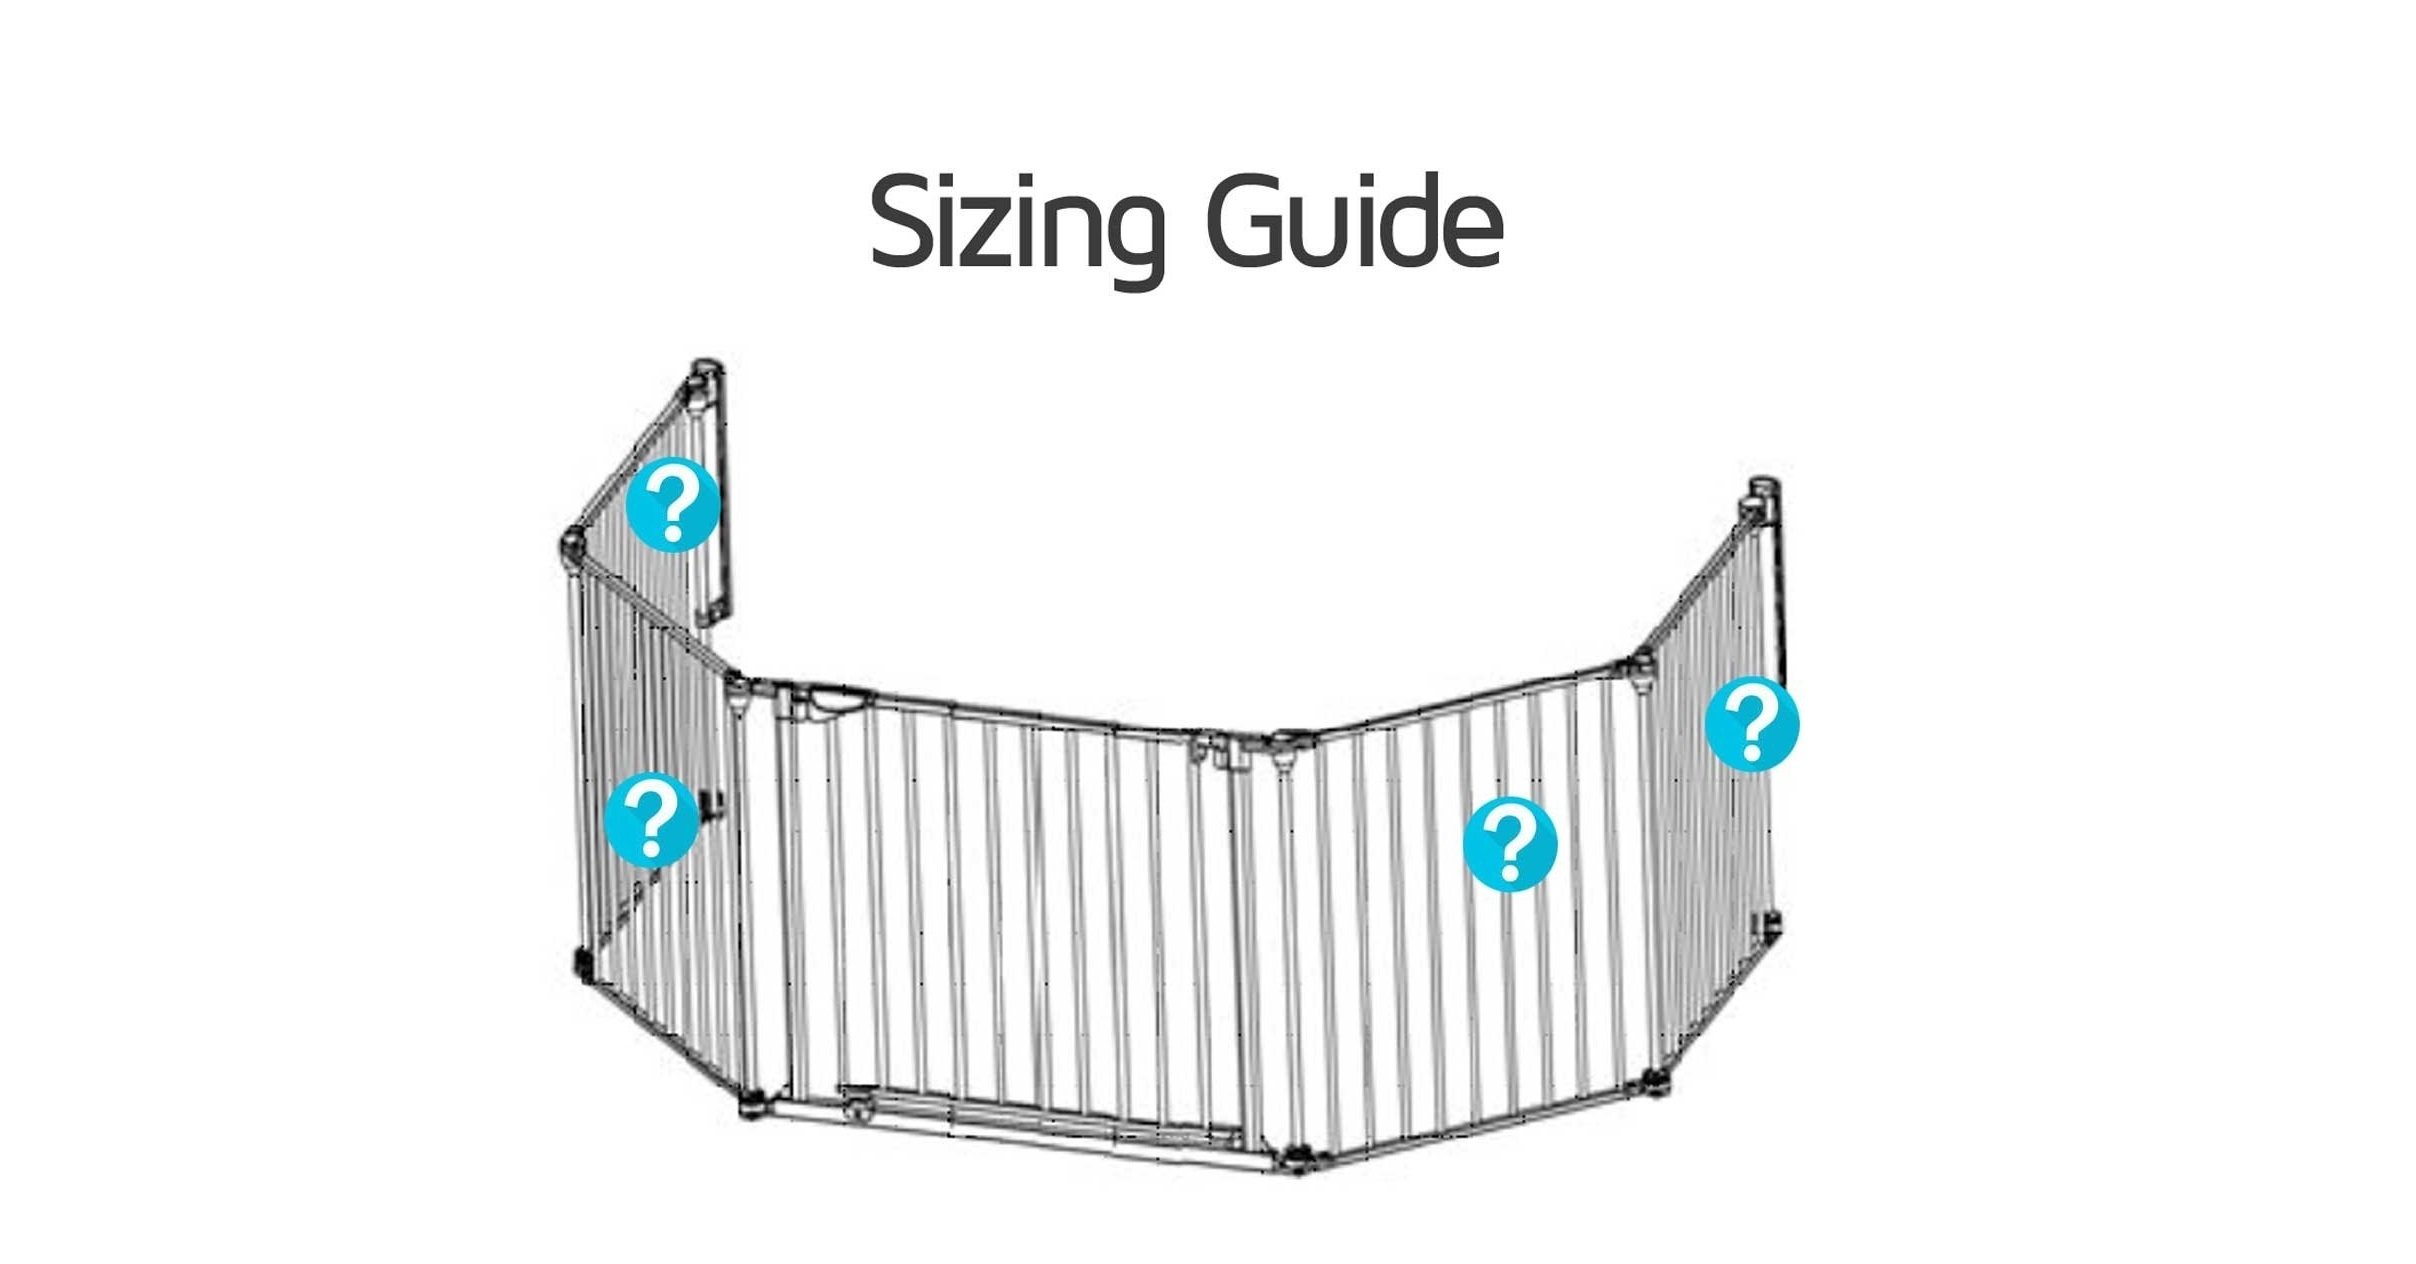 baby fireguard sizing guide